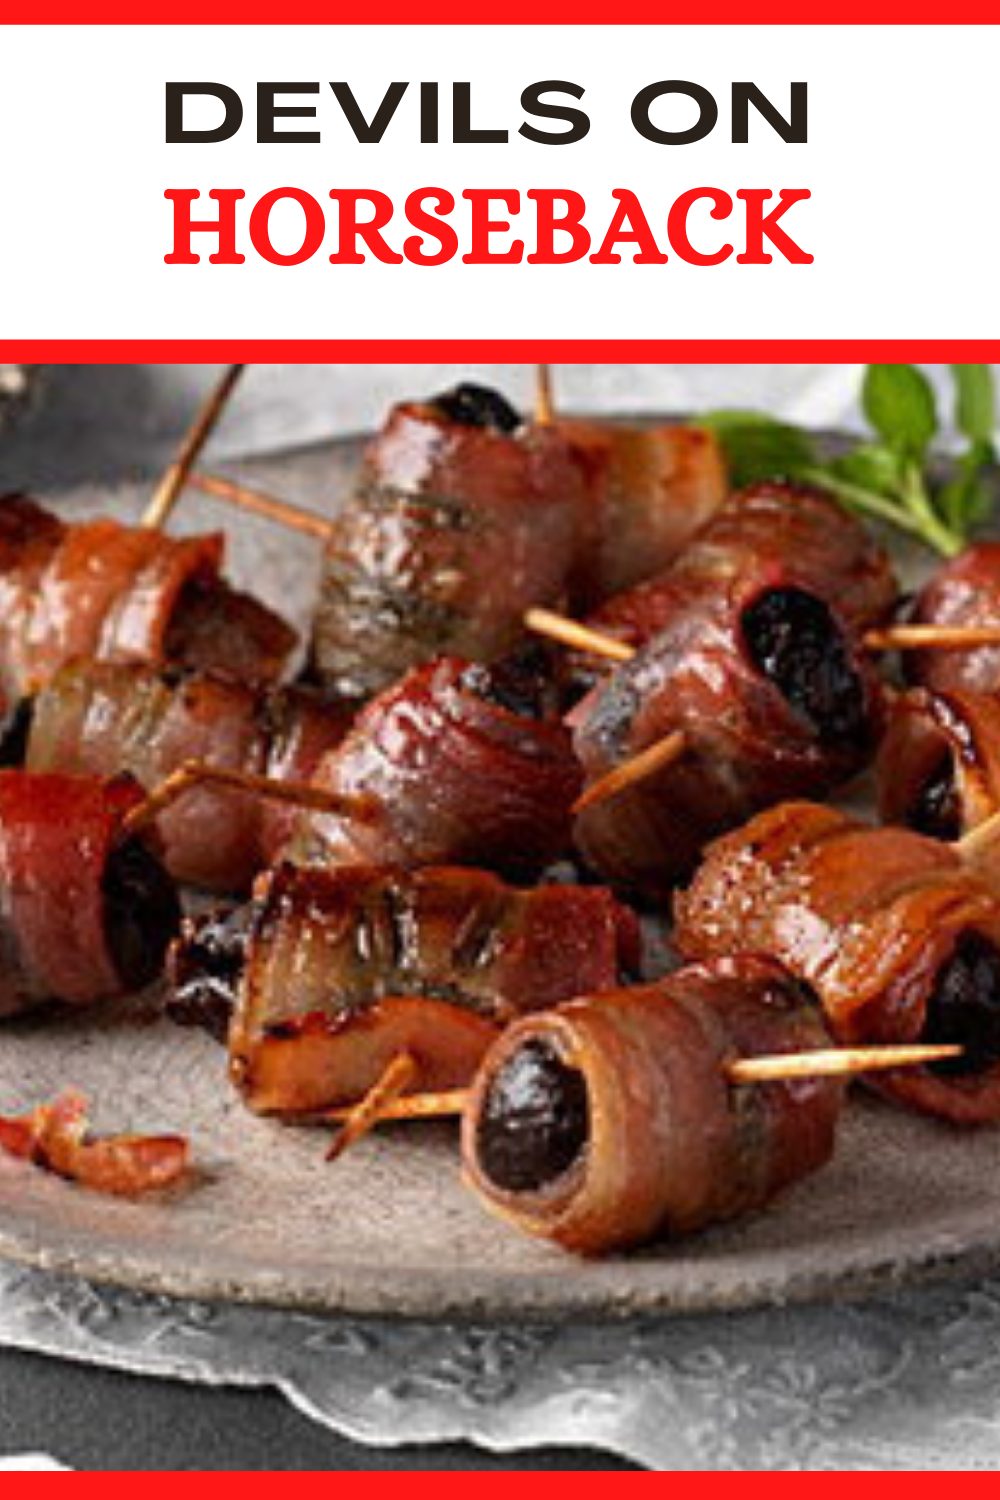 recipe devils on horseback with chicken livers